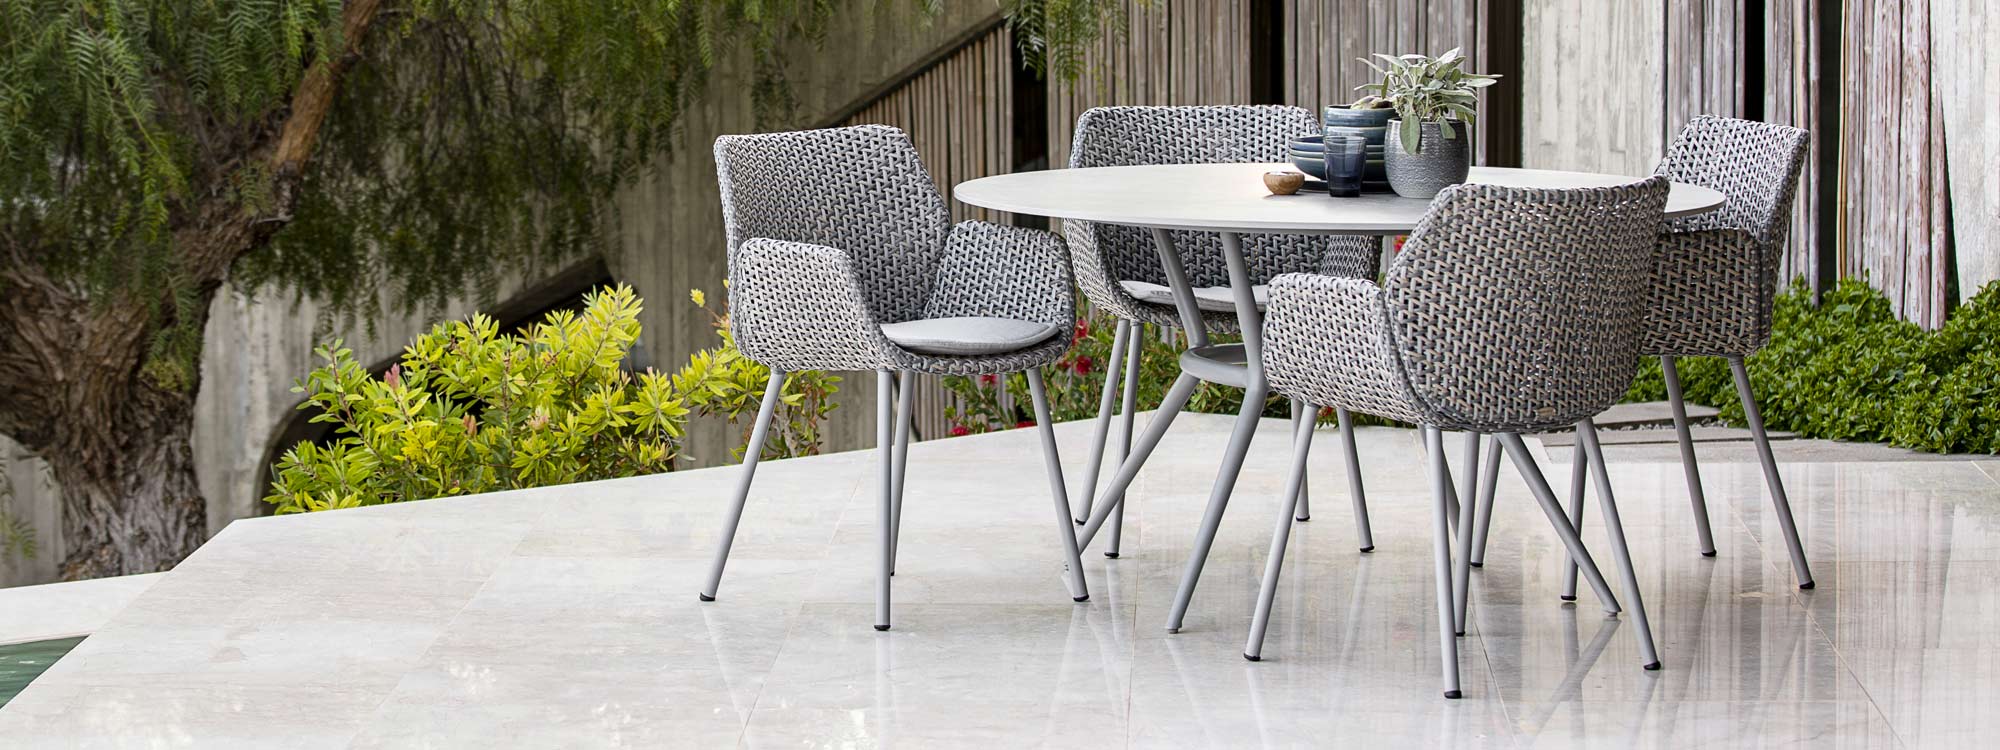 Image of Vibe split cane garden chairs around Joy round garden table by Cane-line